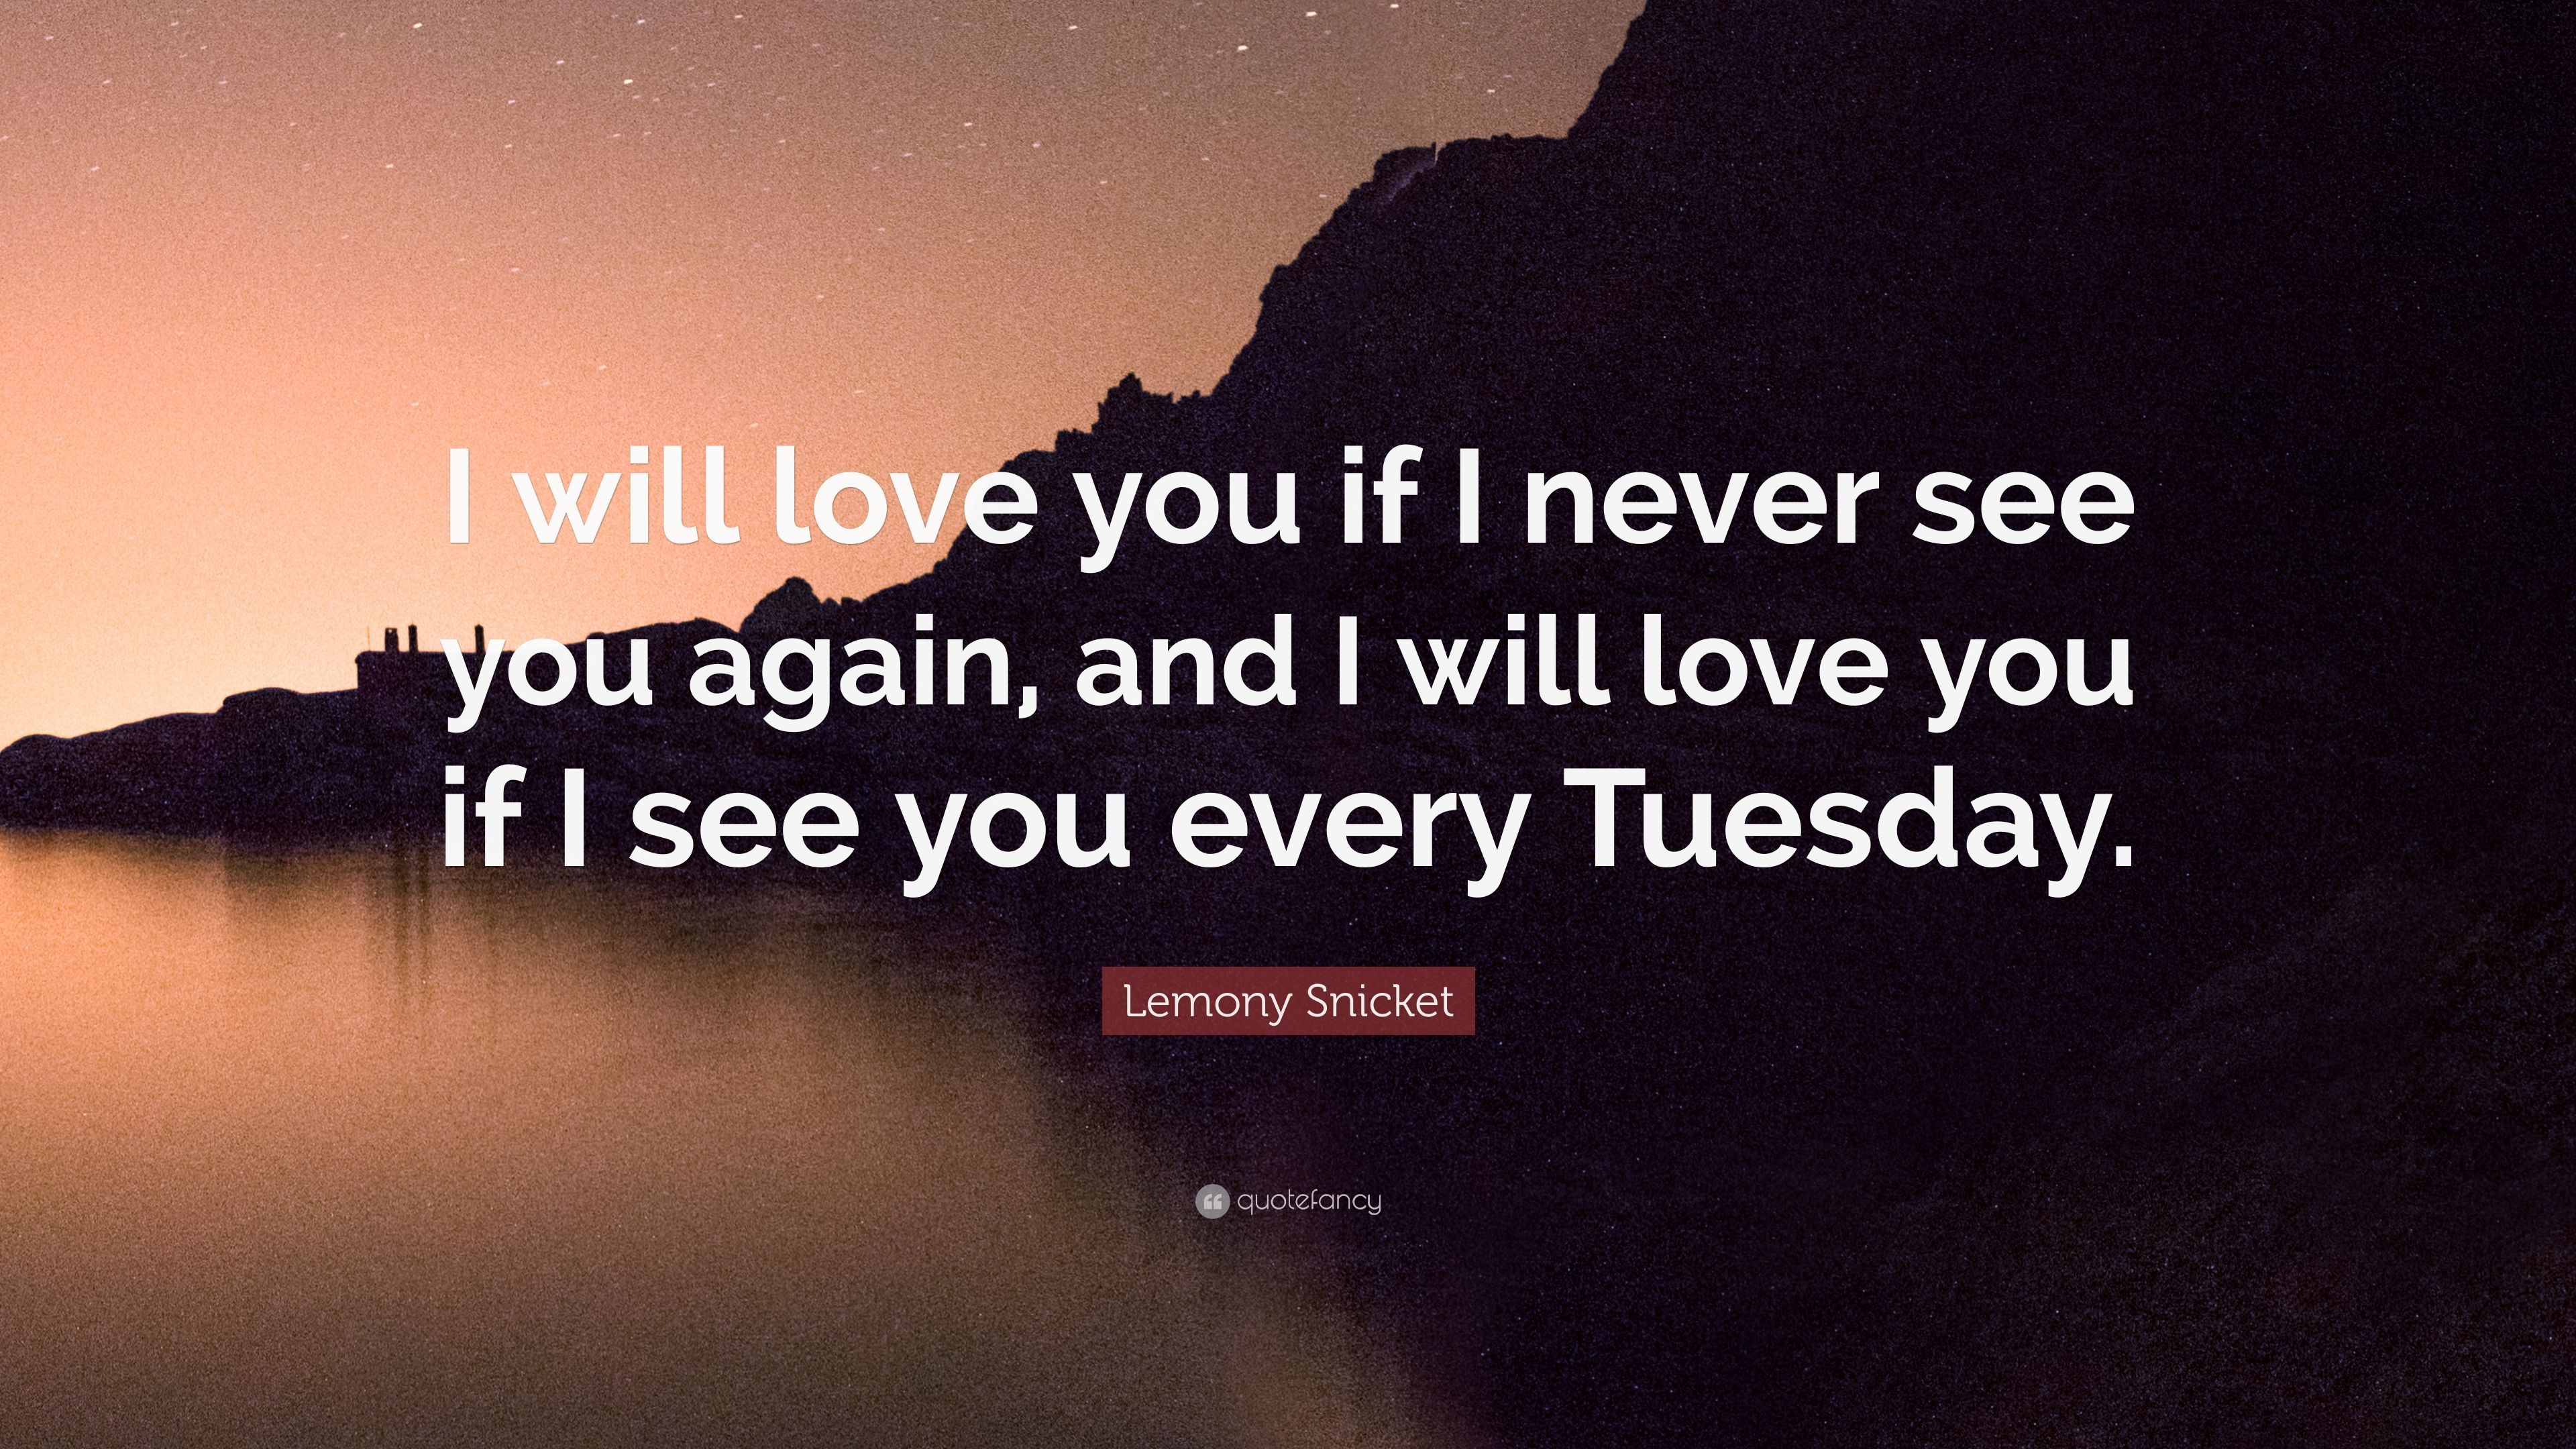 Lemony Snicket Quote: "I will love you if I never see you again.